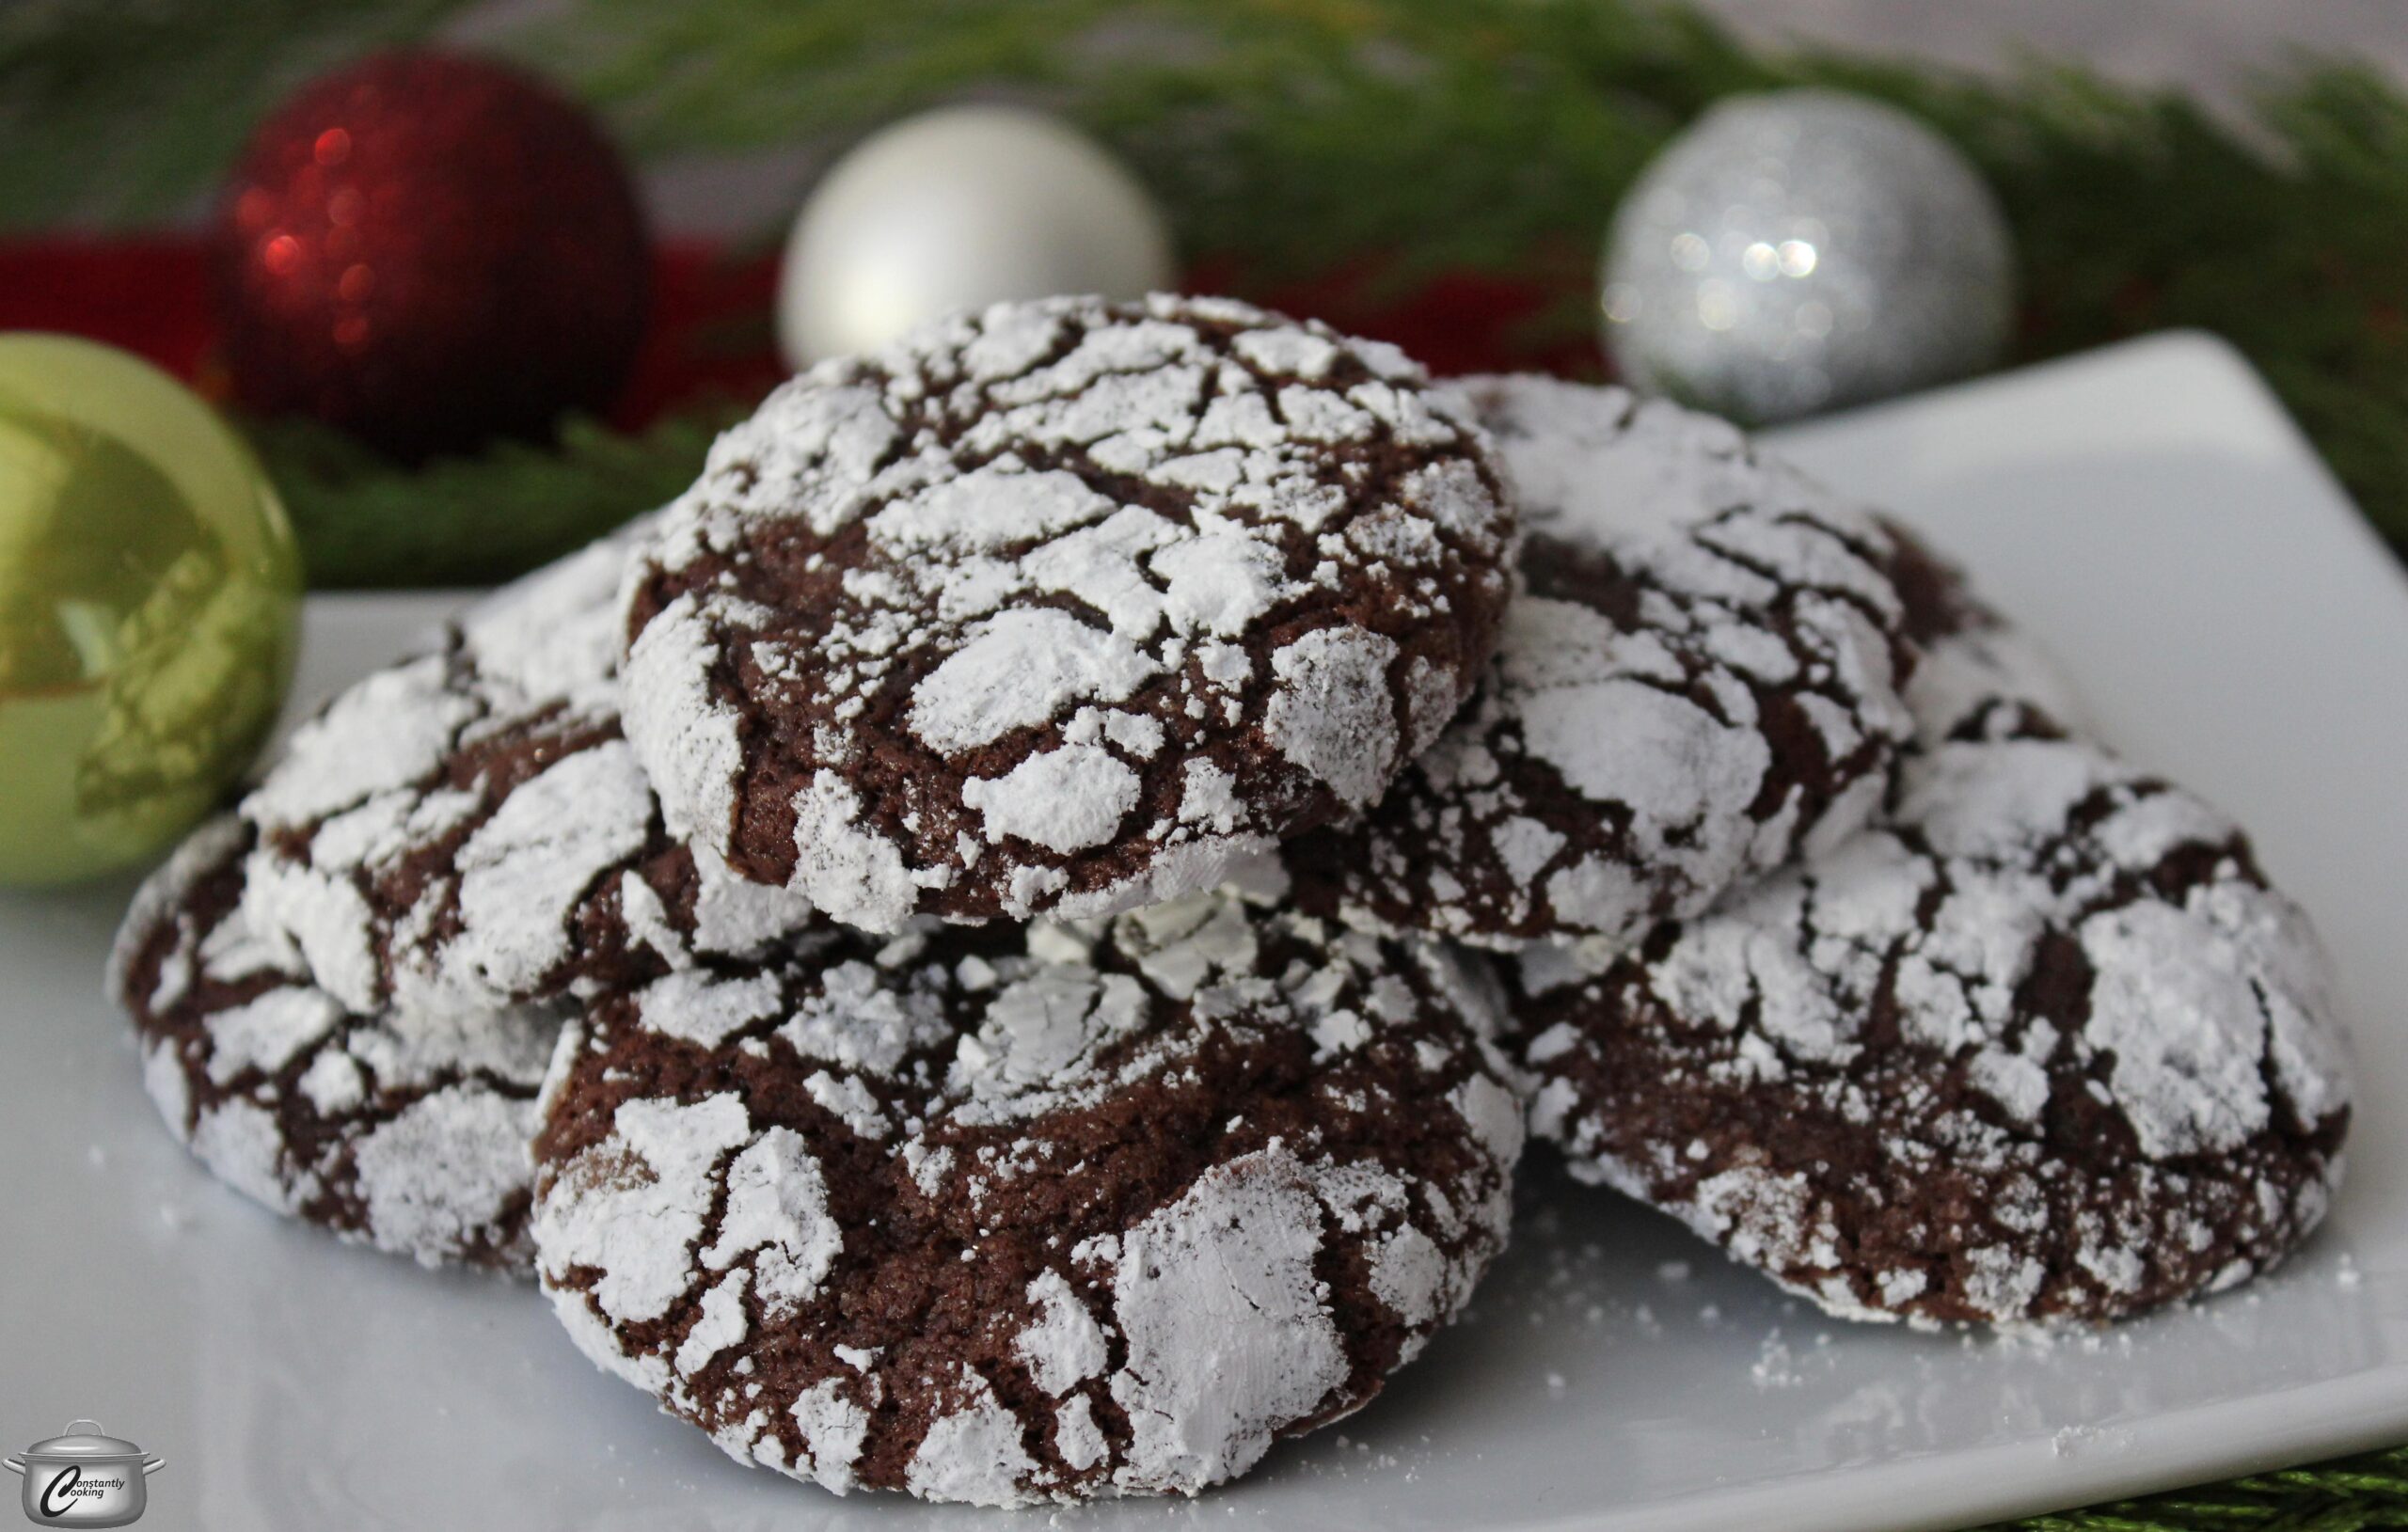  Warm, gooey, and chocolatey: Mocha Crinkles are the perfect indulgent treat.